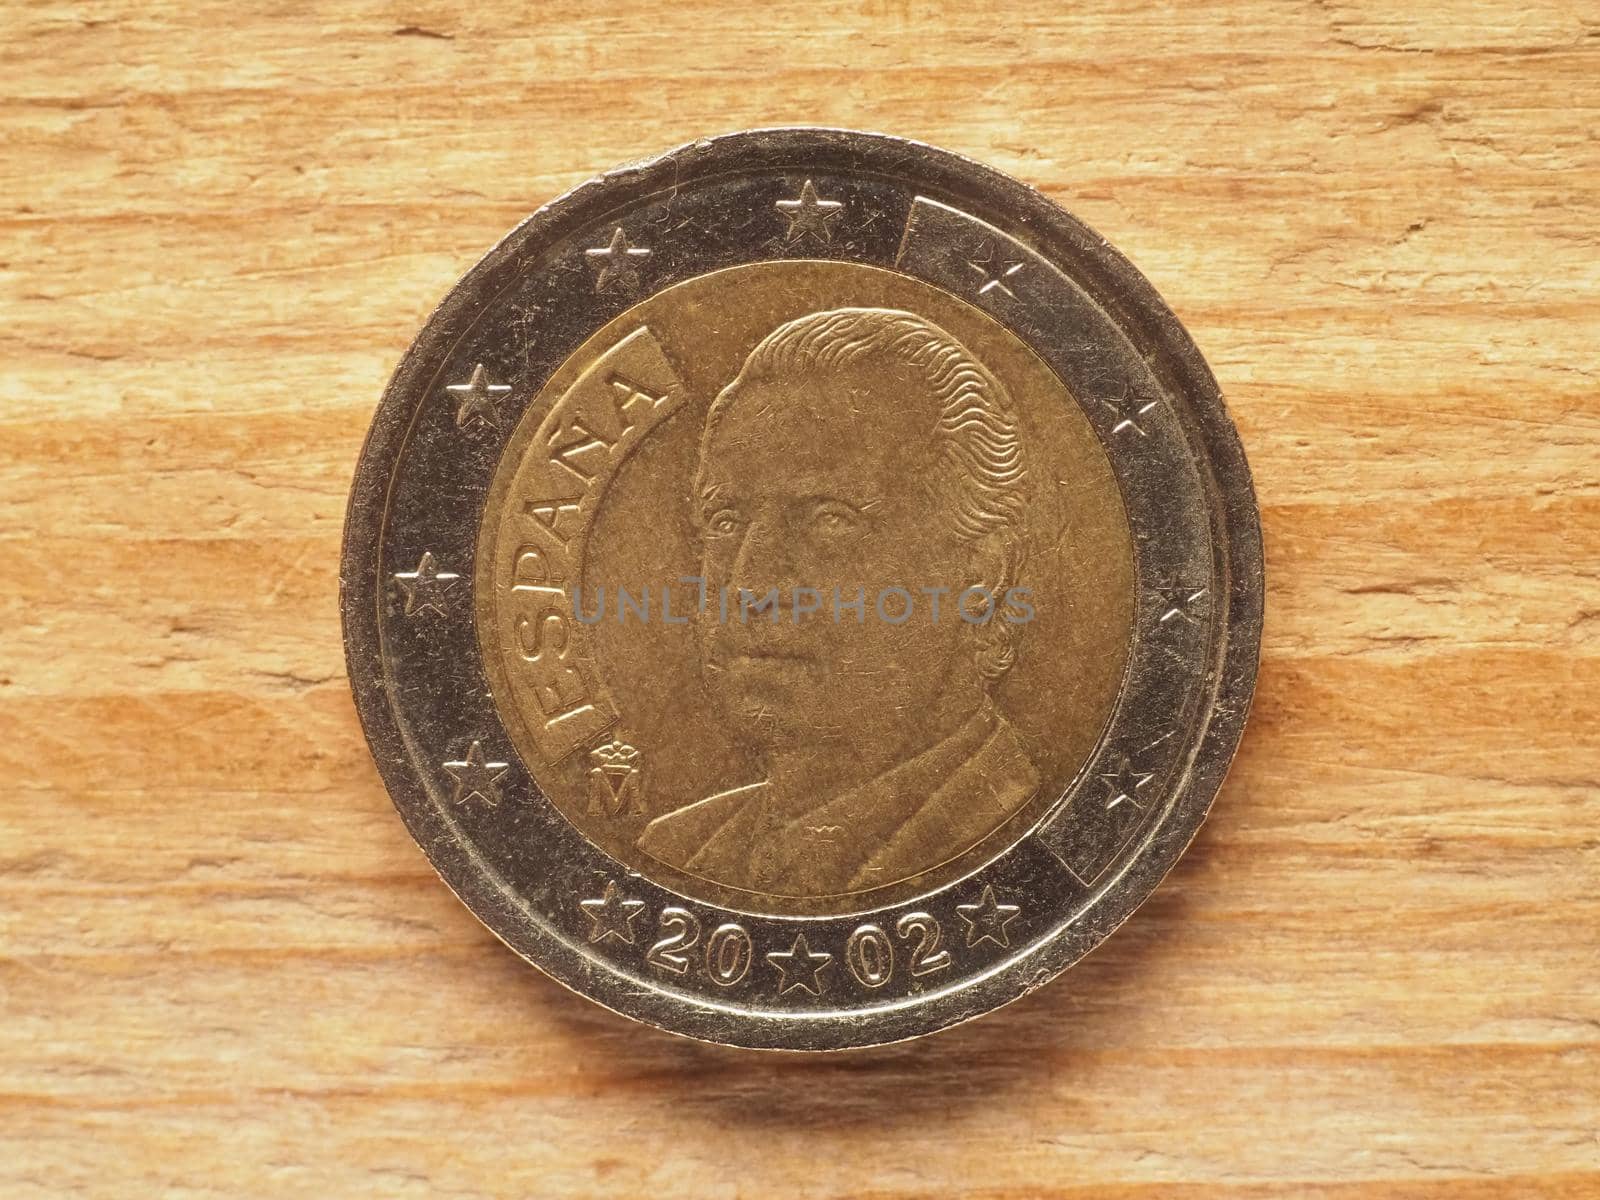 two euro coin, Spanish side showing a portrait of King Juan Carlos I, currency of Spain, European Union